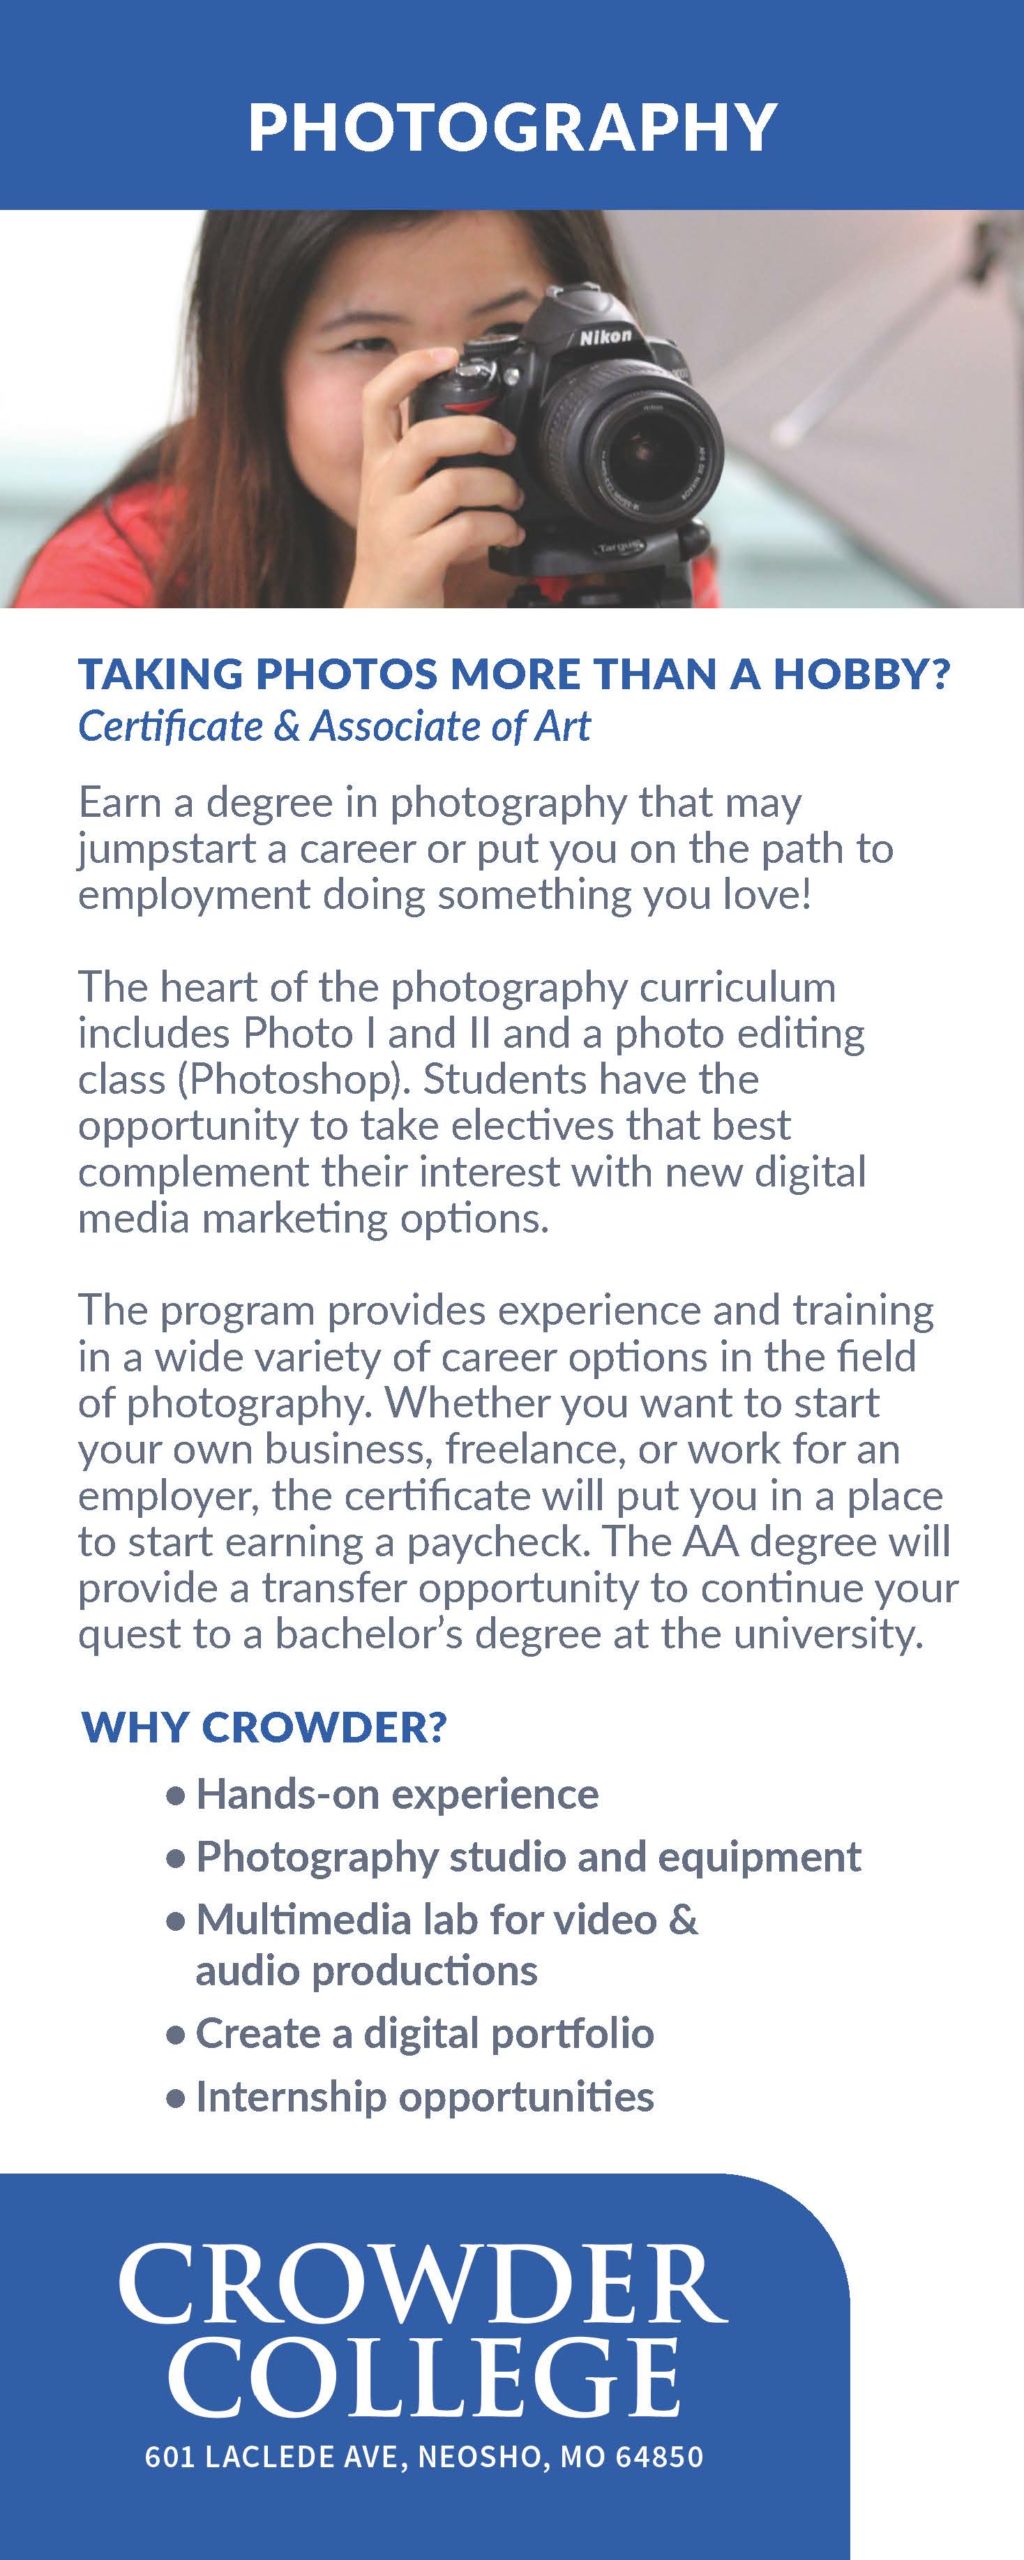 Photography classes at Crowder College